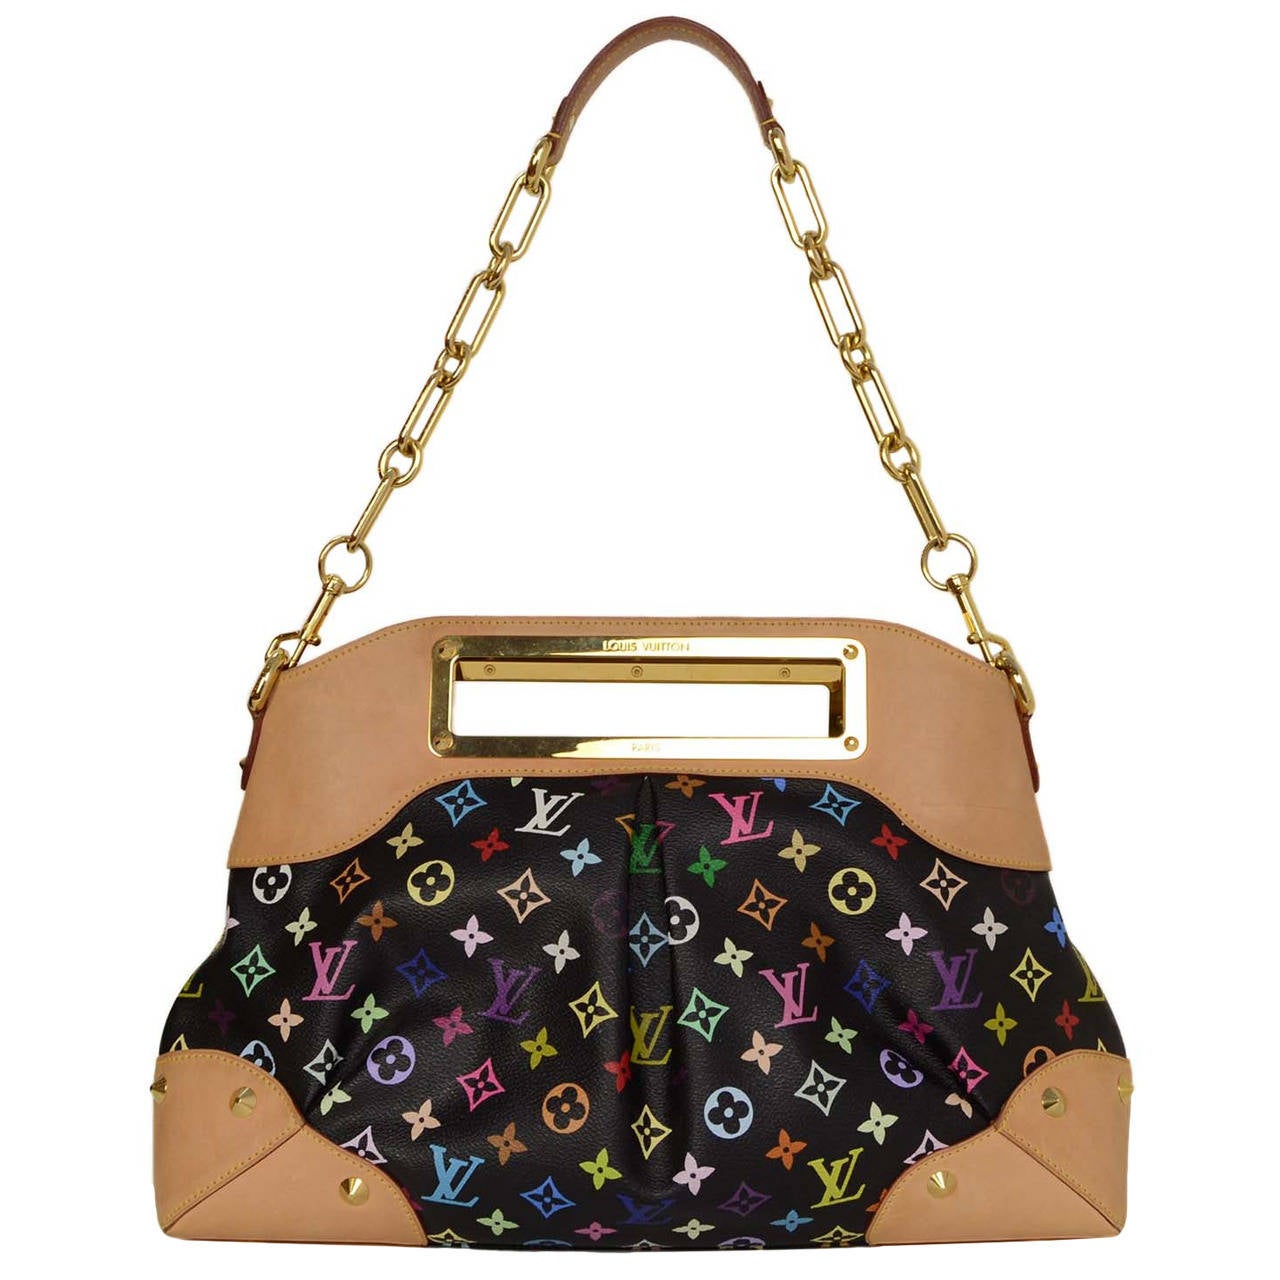 LOUIS VUITTON Black and Multi-Color Monogram Canvas Judy MM Bag GHW at 1stdibs